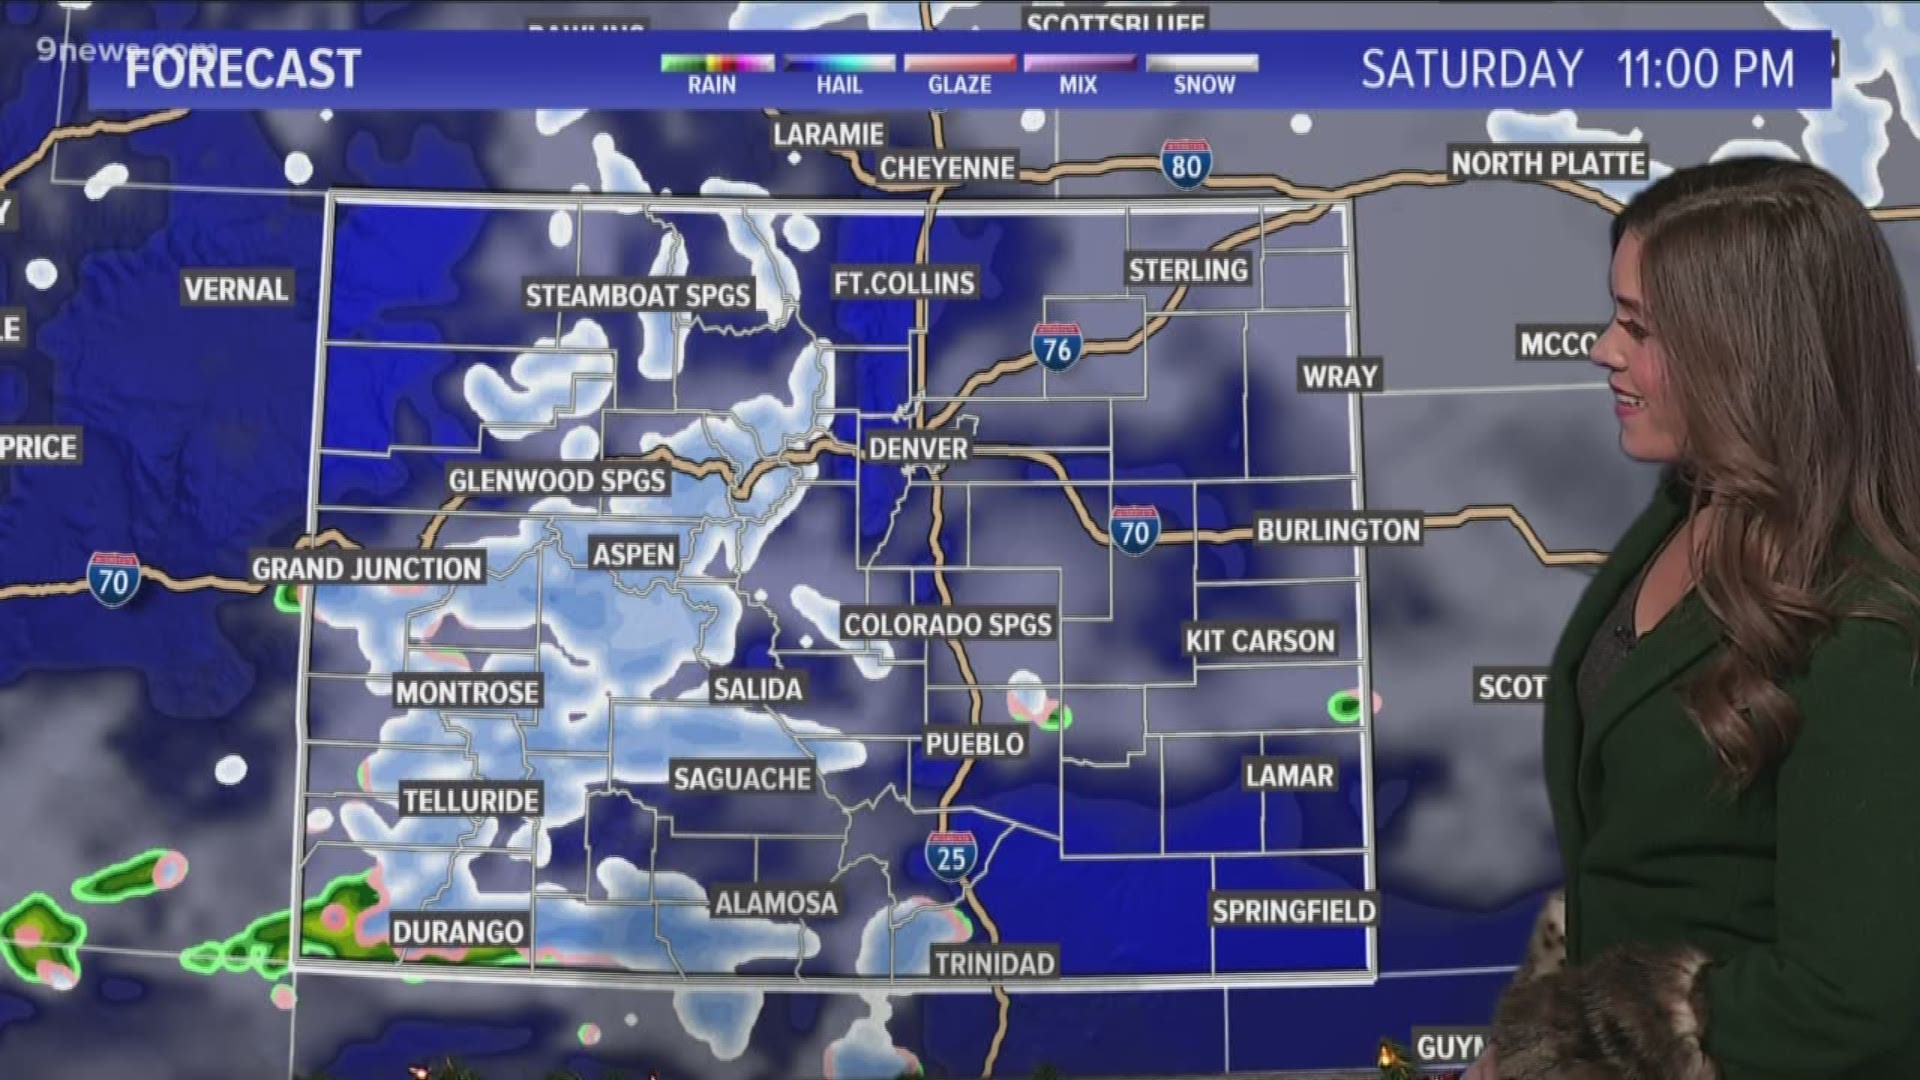 Another round of heavy snow and gusty winds is coming through the High Country overnight into Saturday. Check out your full forecast (12/13/19).